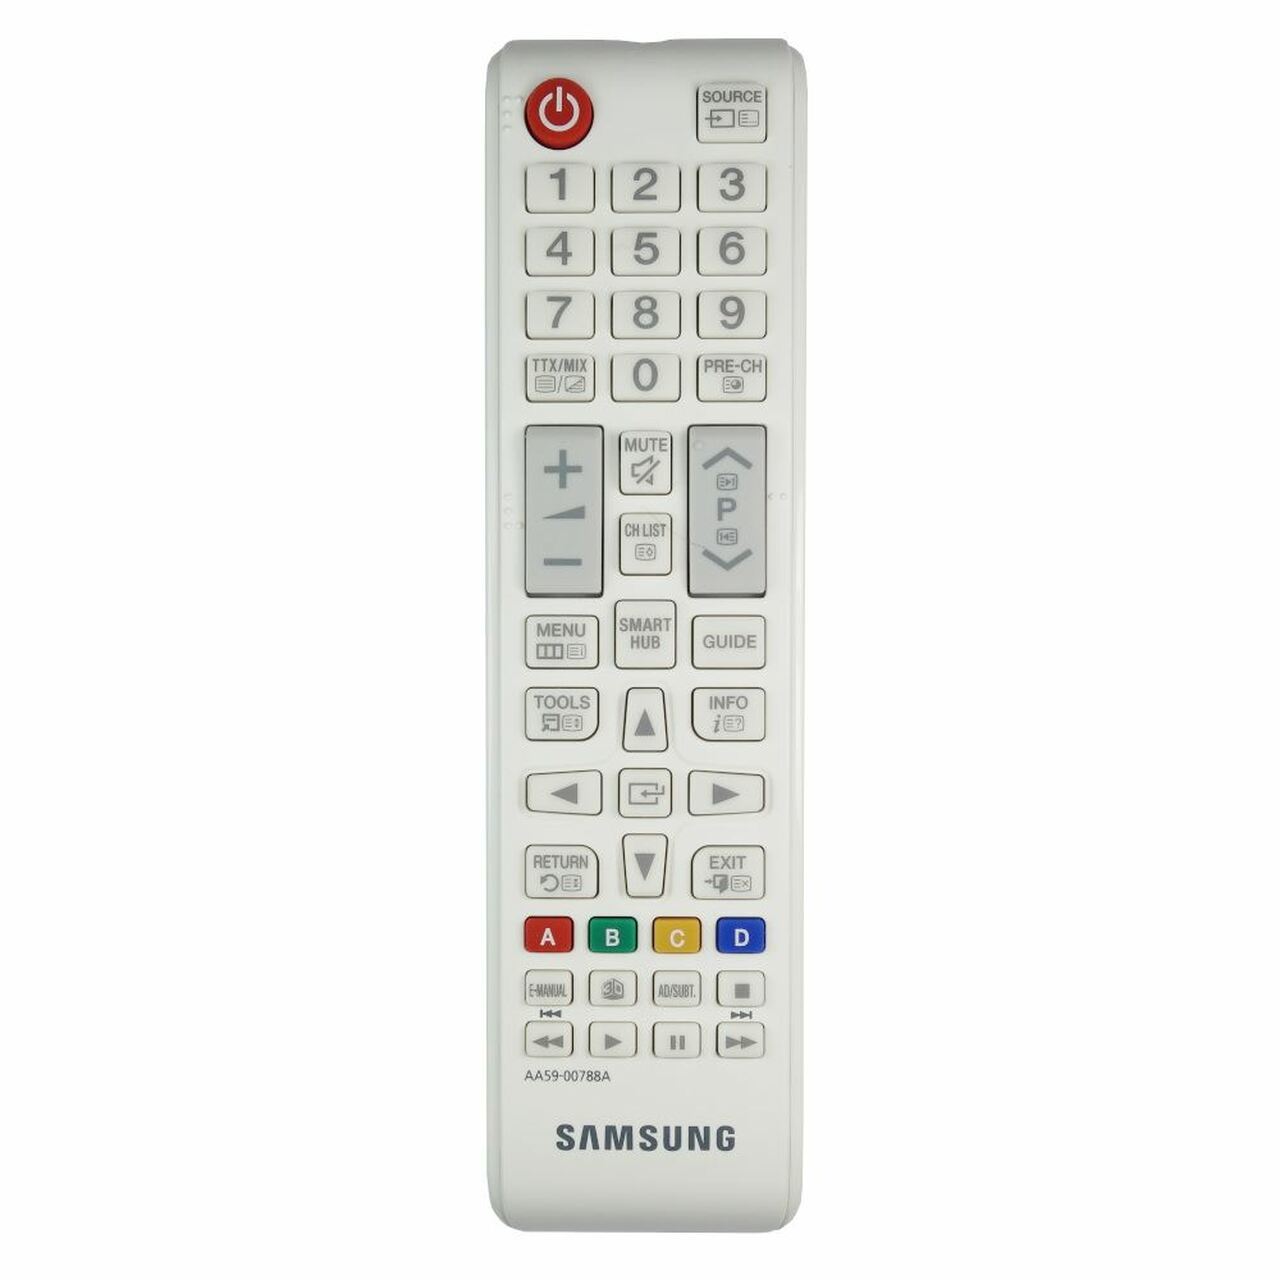 Samsung AA59-00788A Remote Control for Samsung TV